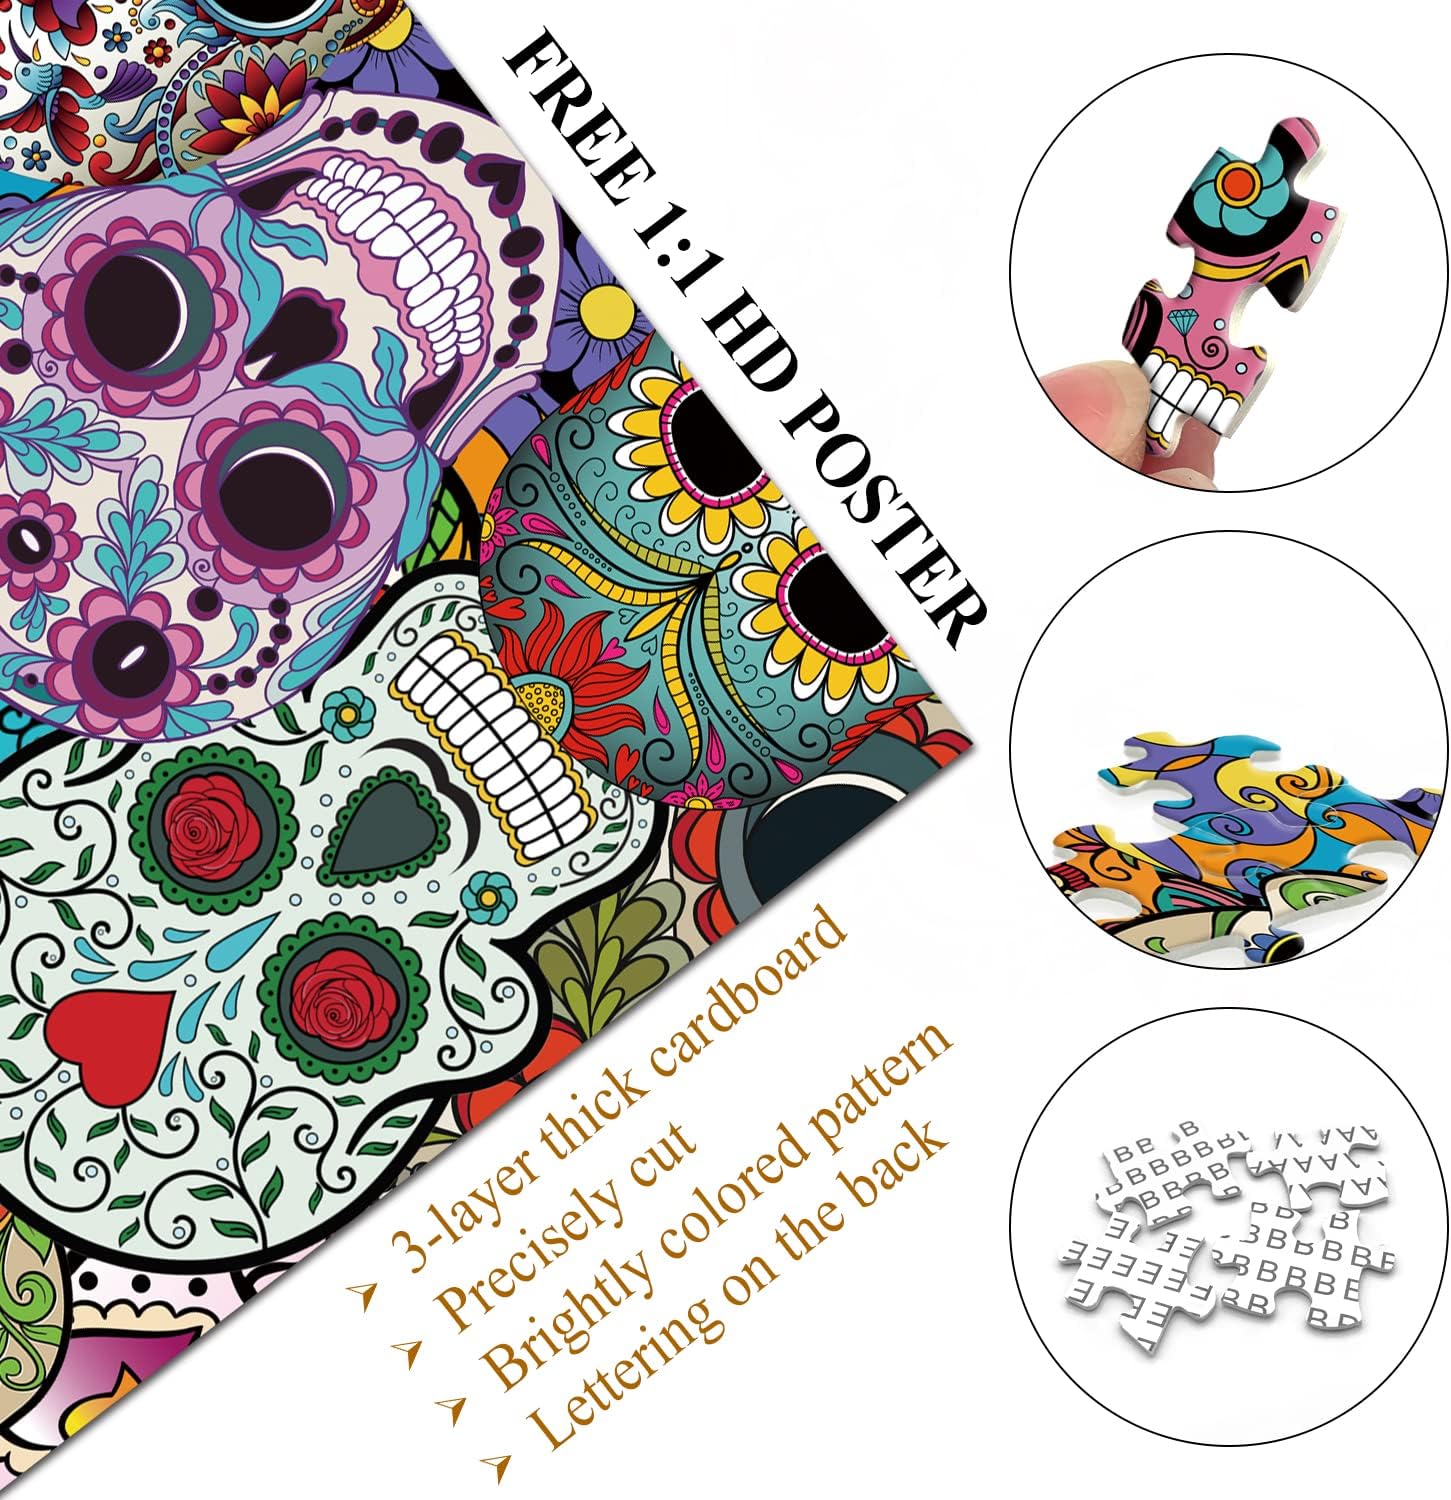 Pickforu® Day of The Dead Sugar Skull Jigsaw Puzzle 1000 pièces